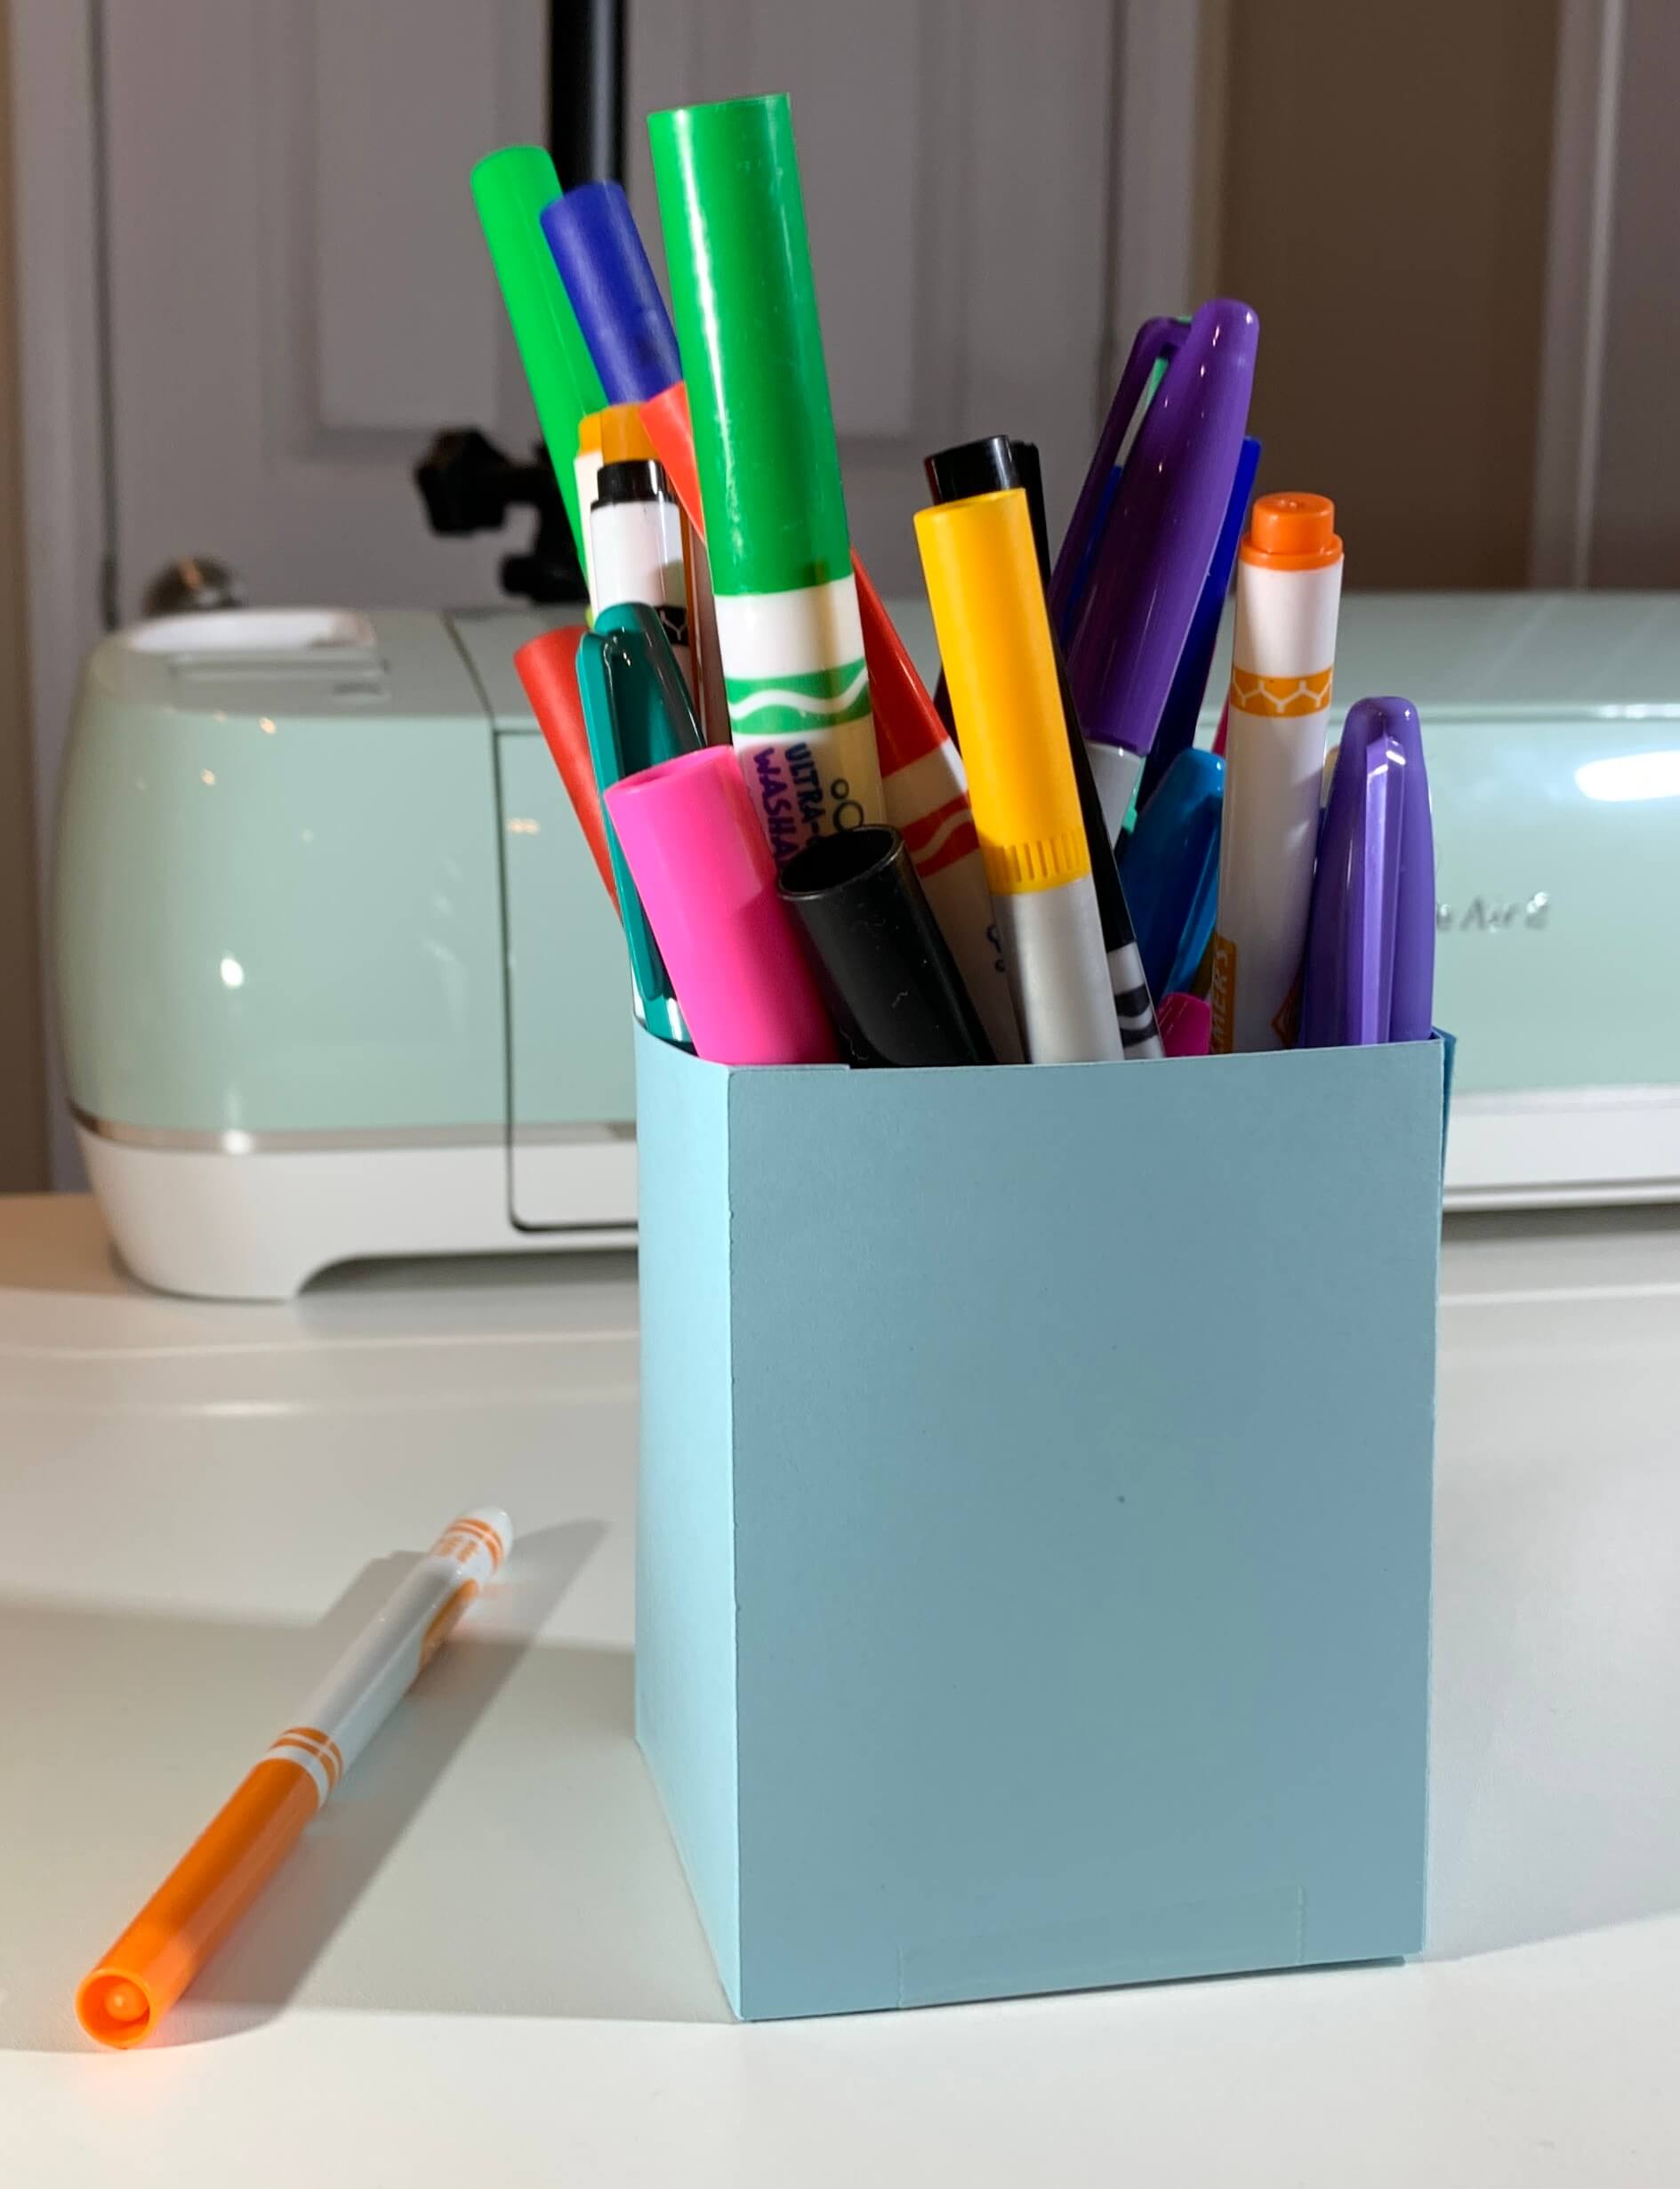 How to use Crayola markers with a Cricut - NeliDesign